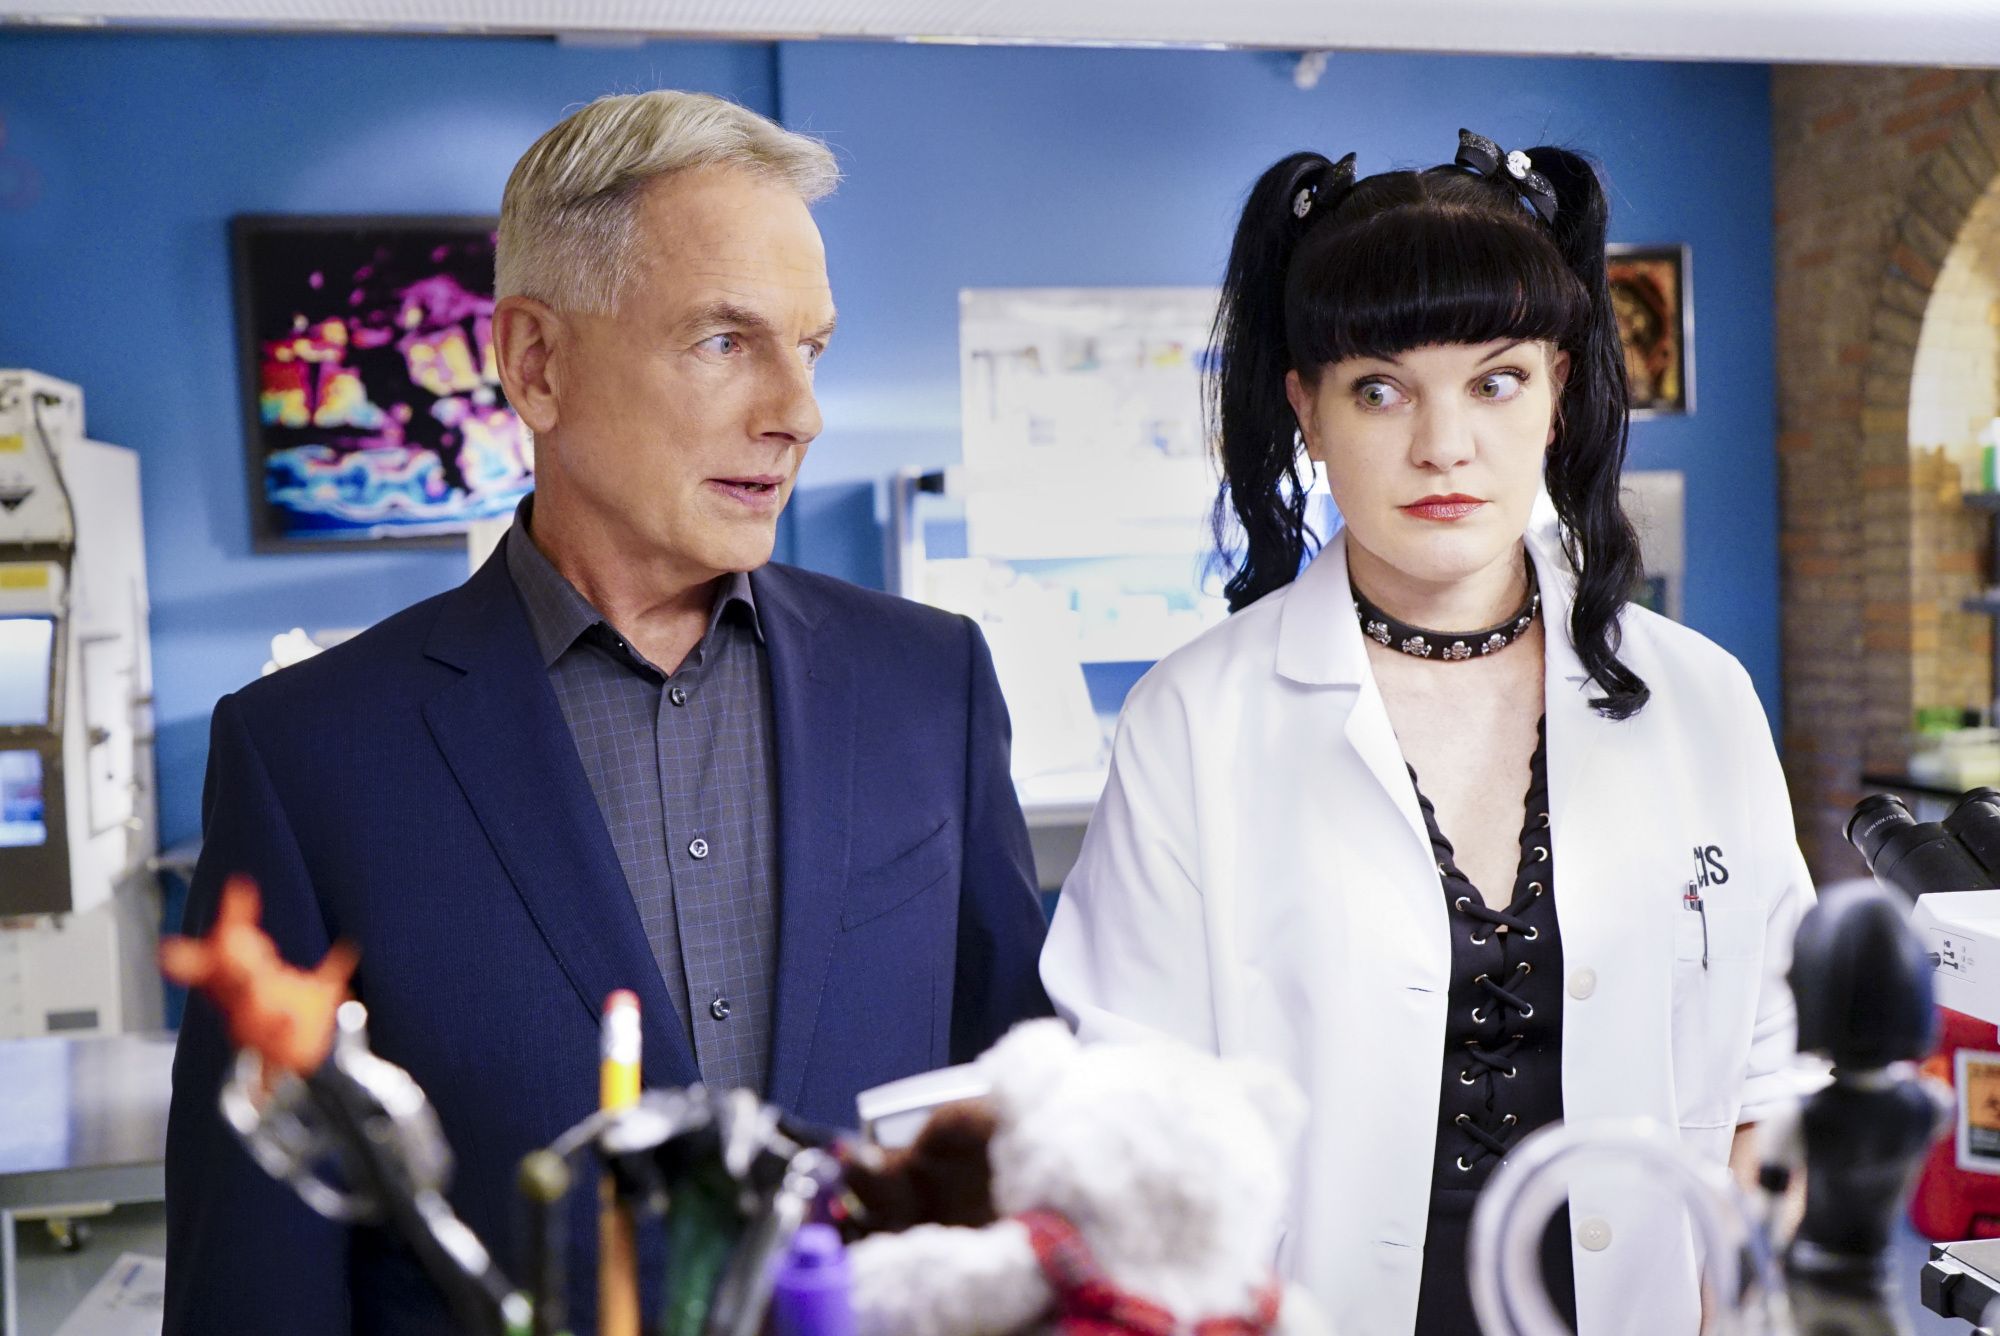 Mark Harmon and Pauley Perrette in an episode of "NCIS." | Source: Getty Images